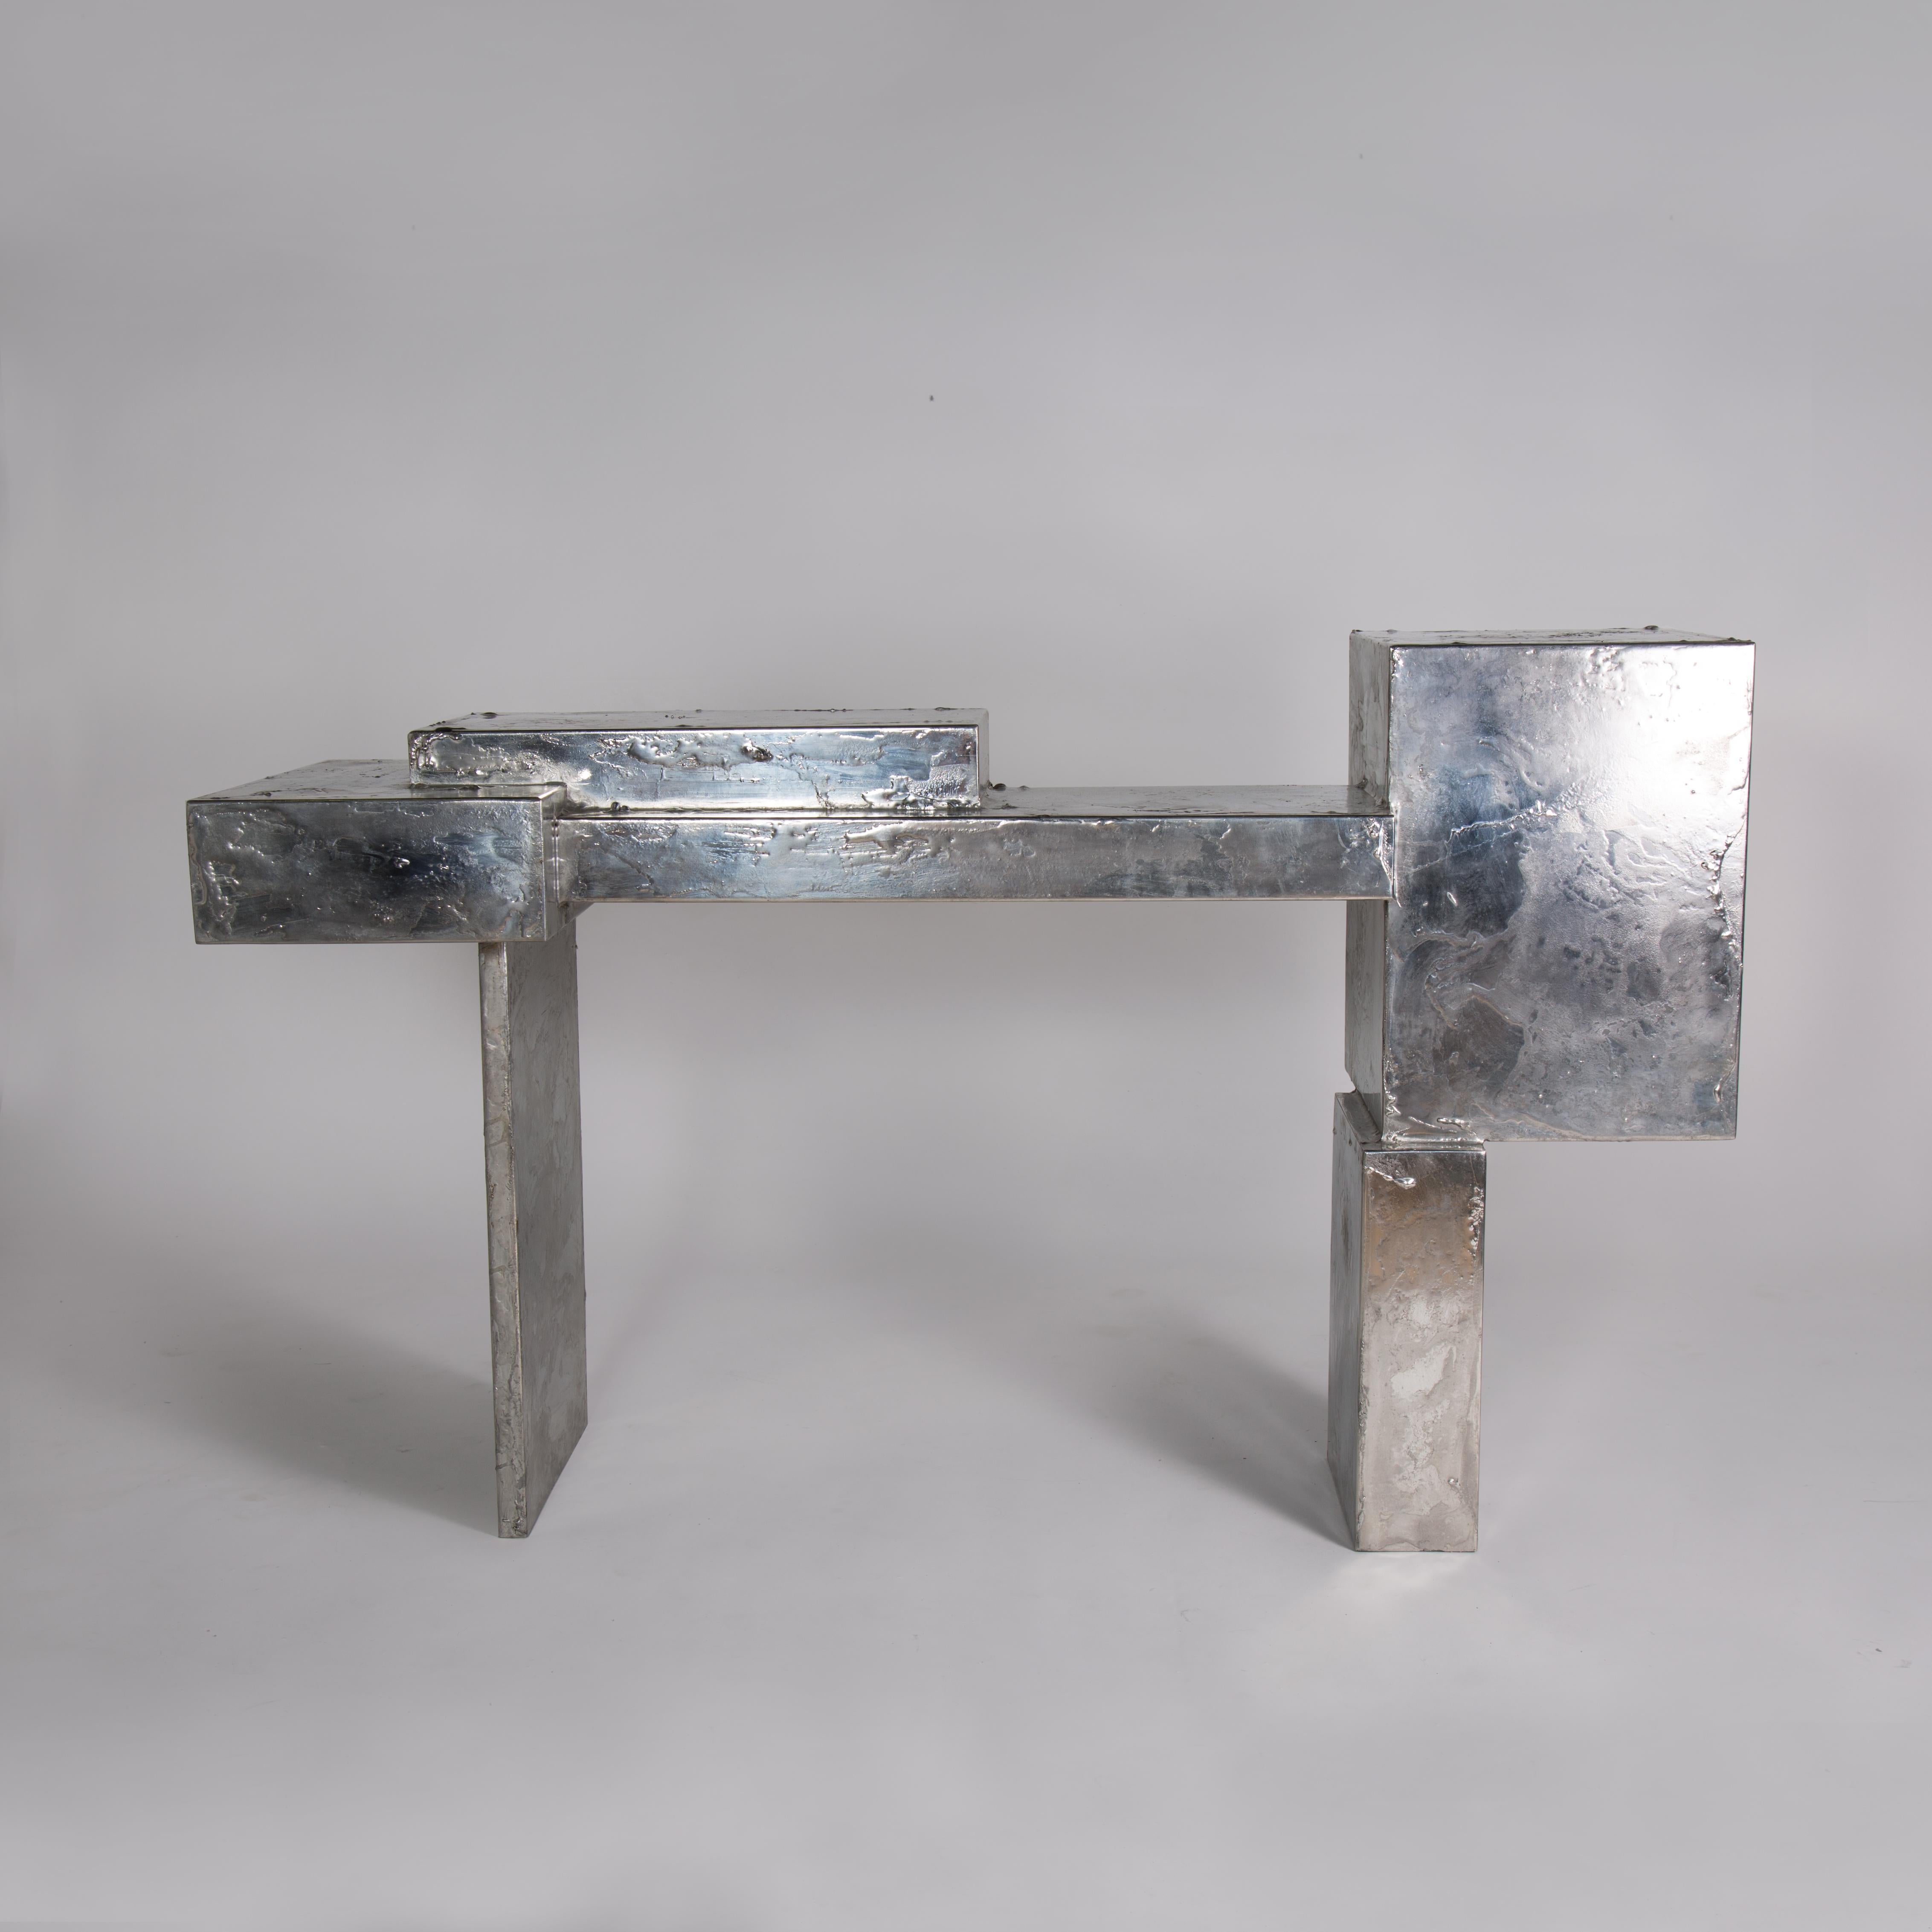 Pewter console by Gentner Design
Dimensions: D 137 x W 43 x H 84 cm
Materials: pewter on steel.

The Pewter Collection is a family of furniture pieces defined by their materiality and formal qualities. One Crucible at a time, pewter is melted